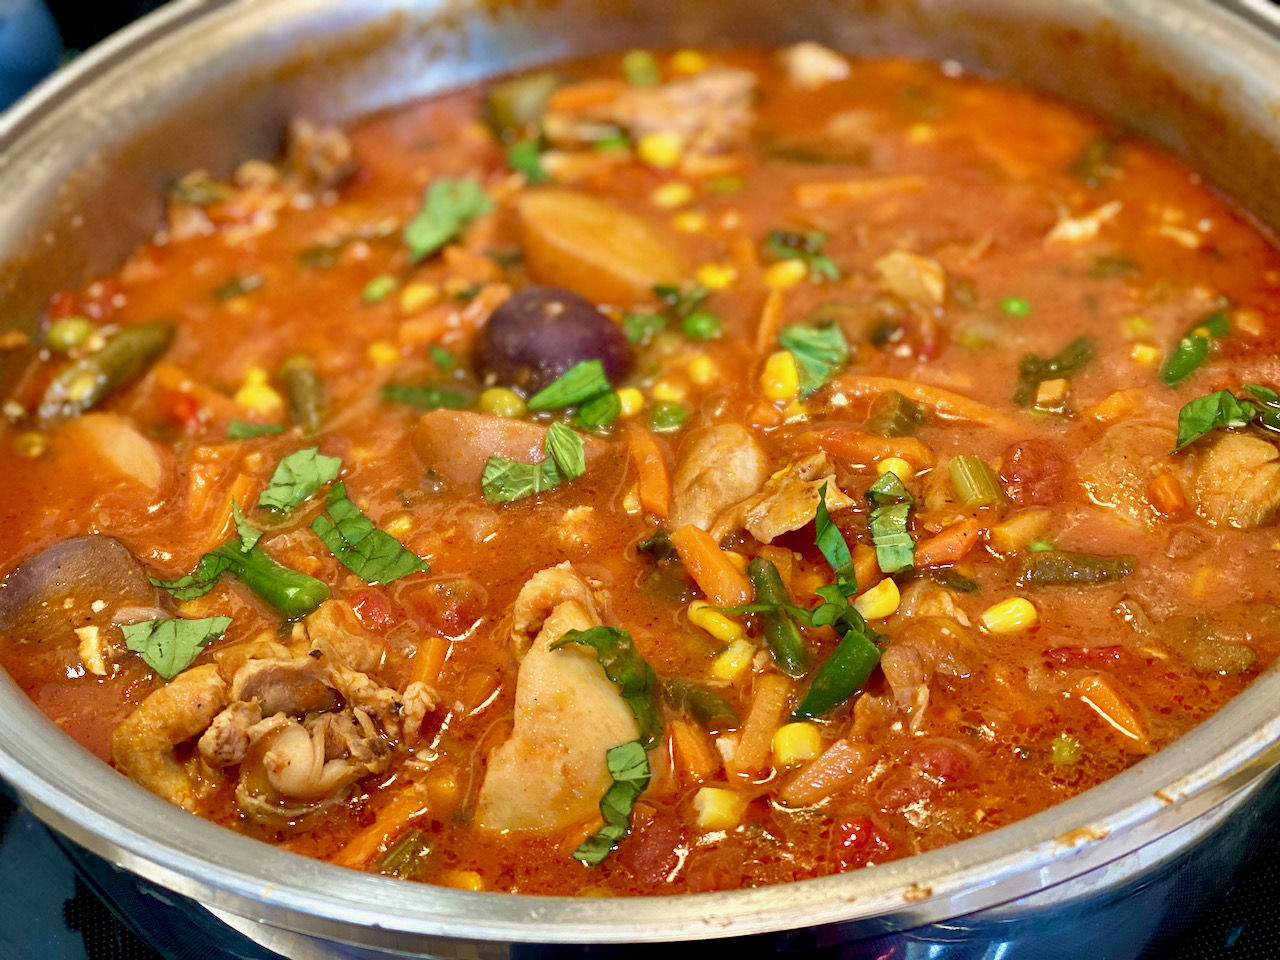 Peruvian-Style Chicken Vegetable Stew with Tomatoes & Mini Potatoes